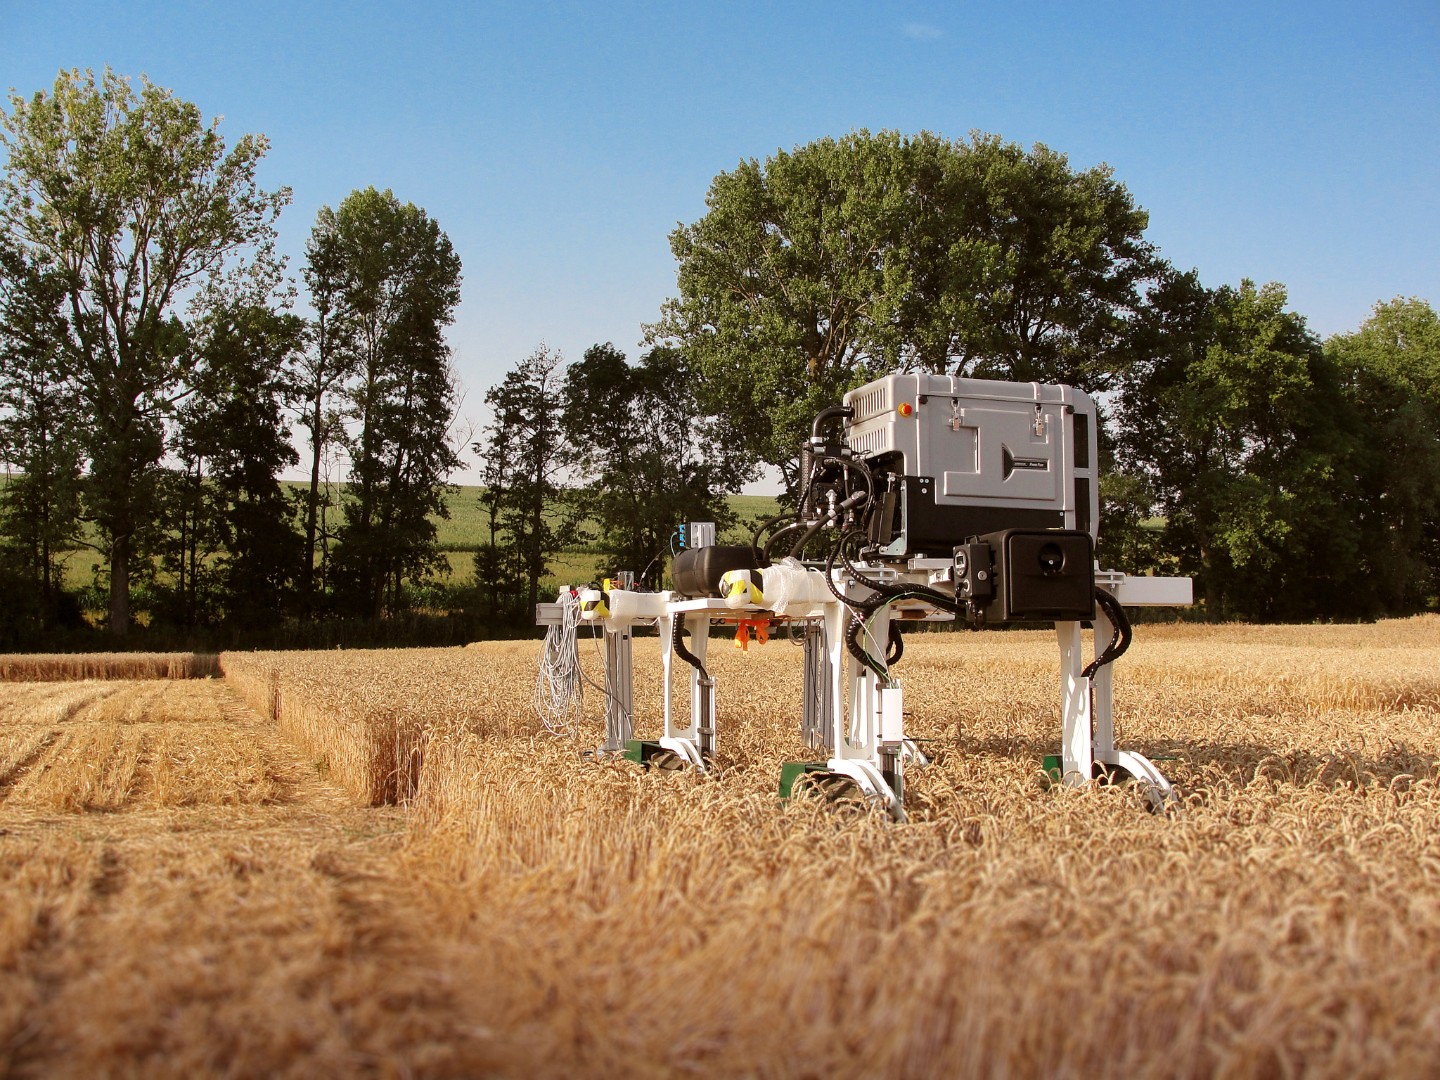 Phenotyping robot at work in the field